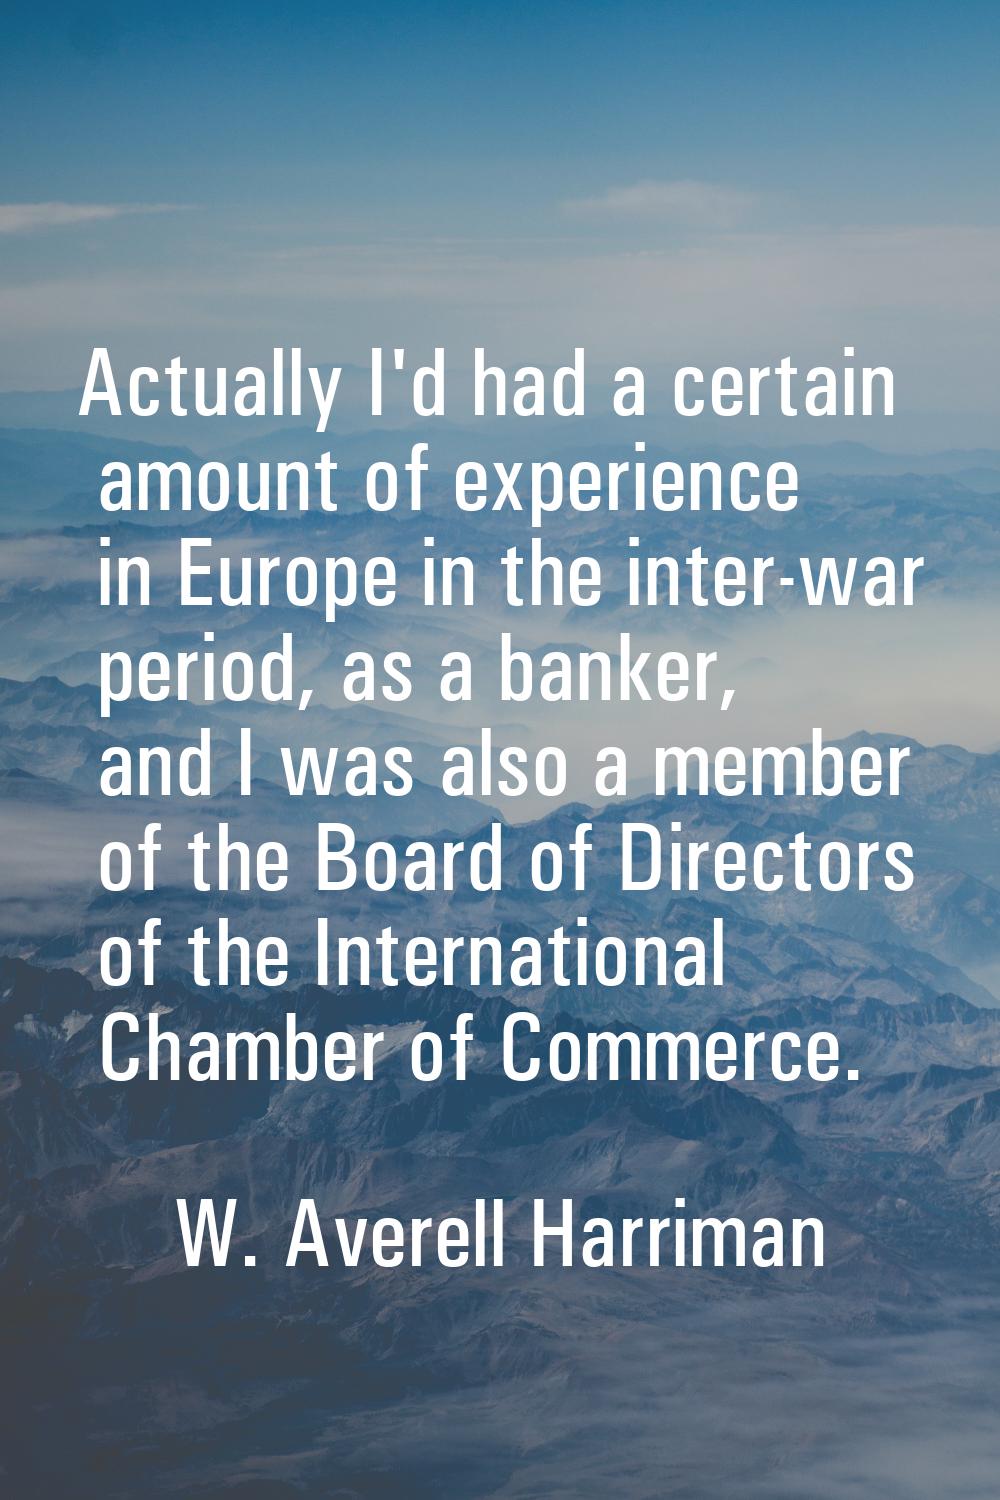 Actually I'd had a certain amount of experience in Europe in the inter-war period, as a banker, and